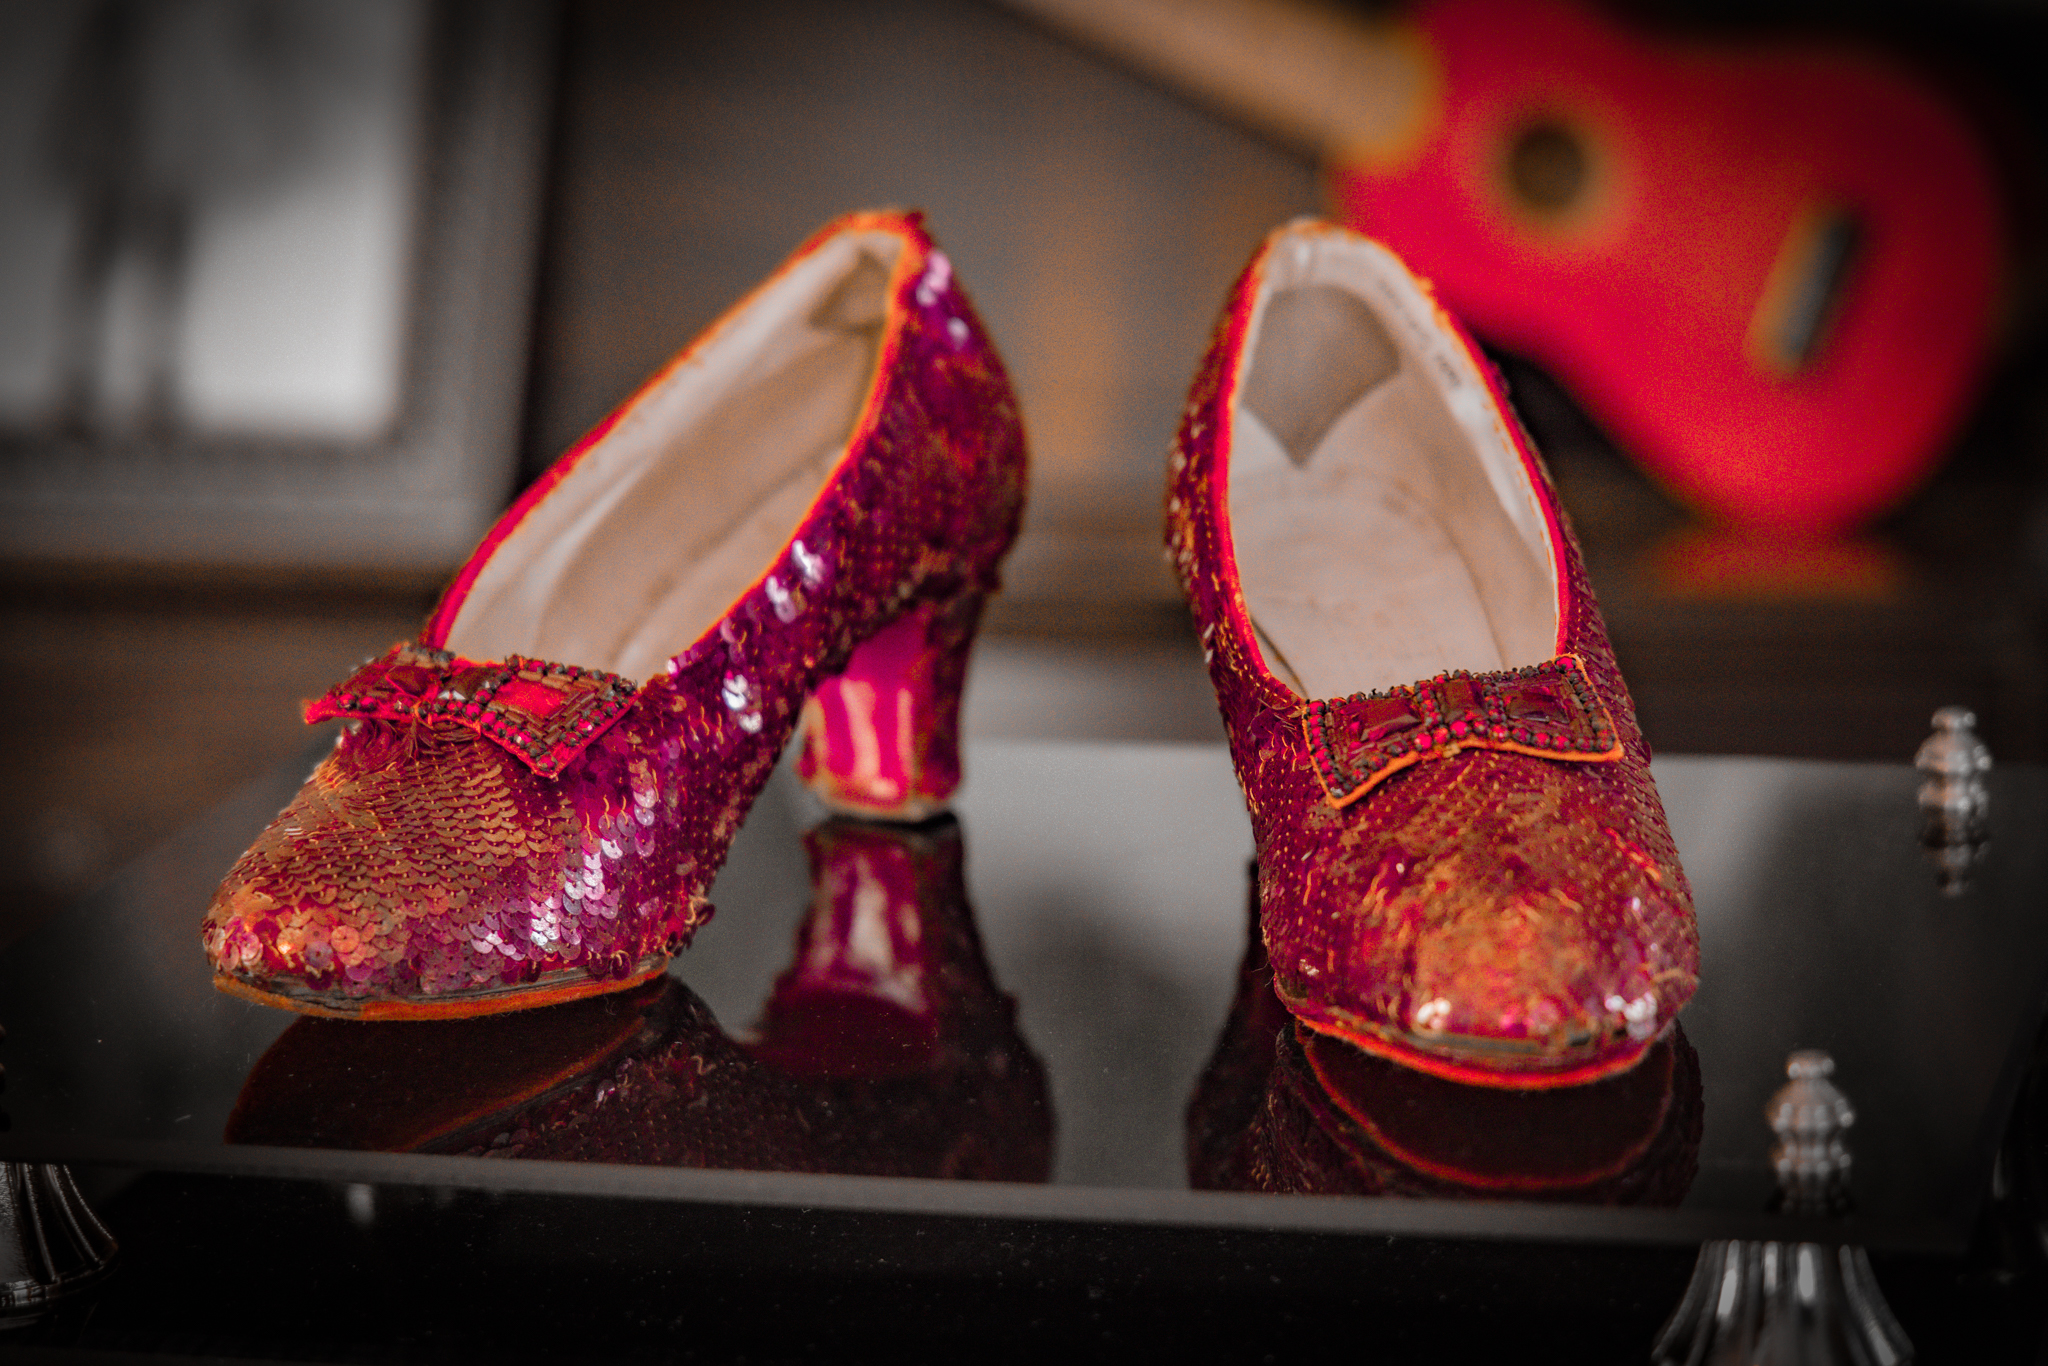 Ruby slippers from "The Wizard of Oz."